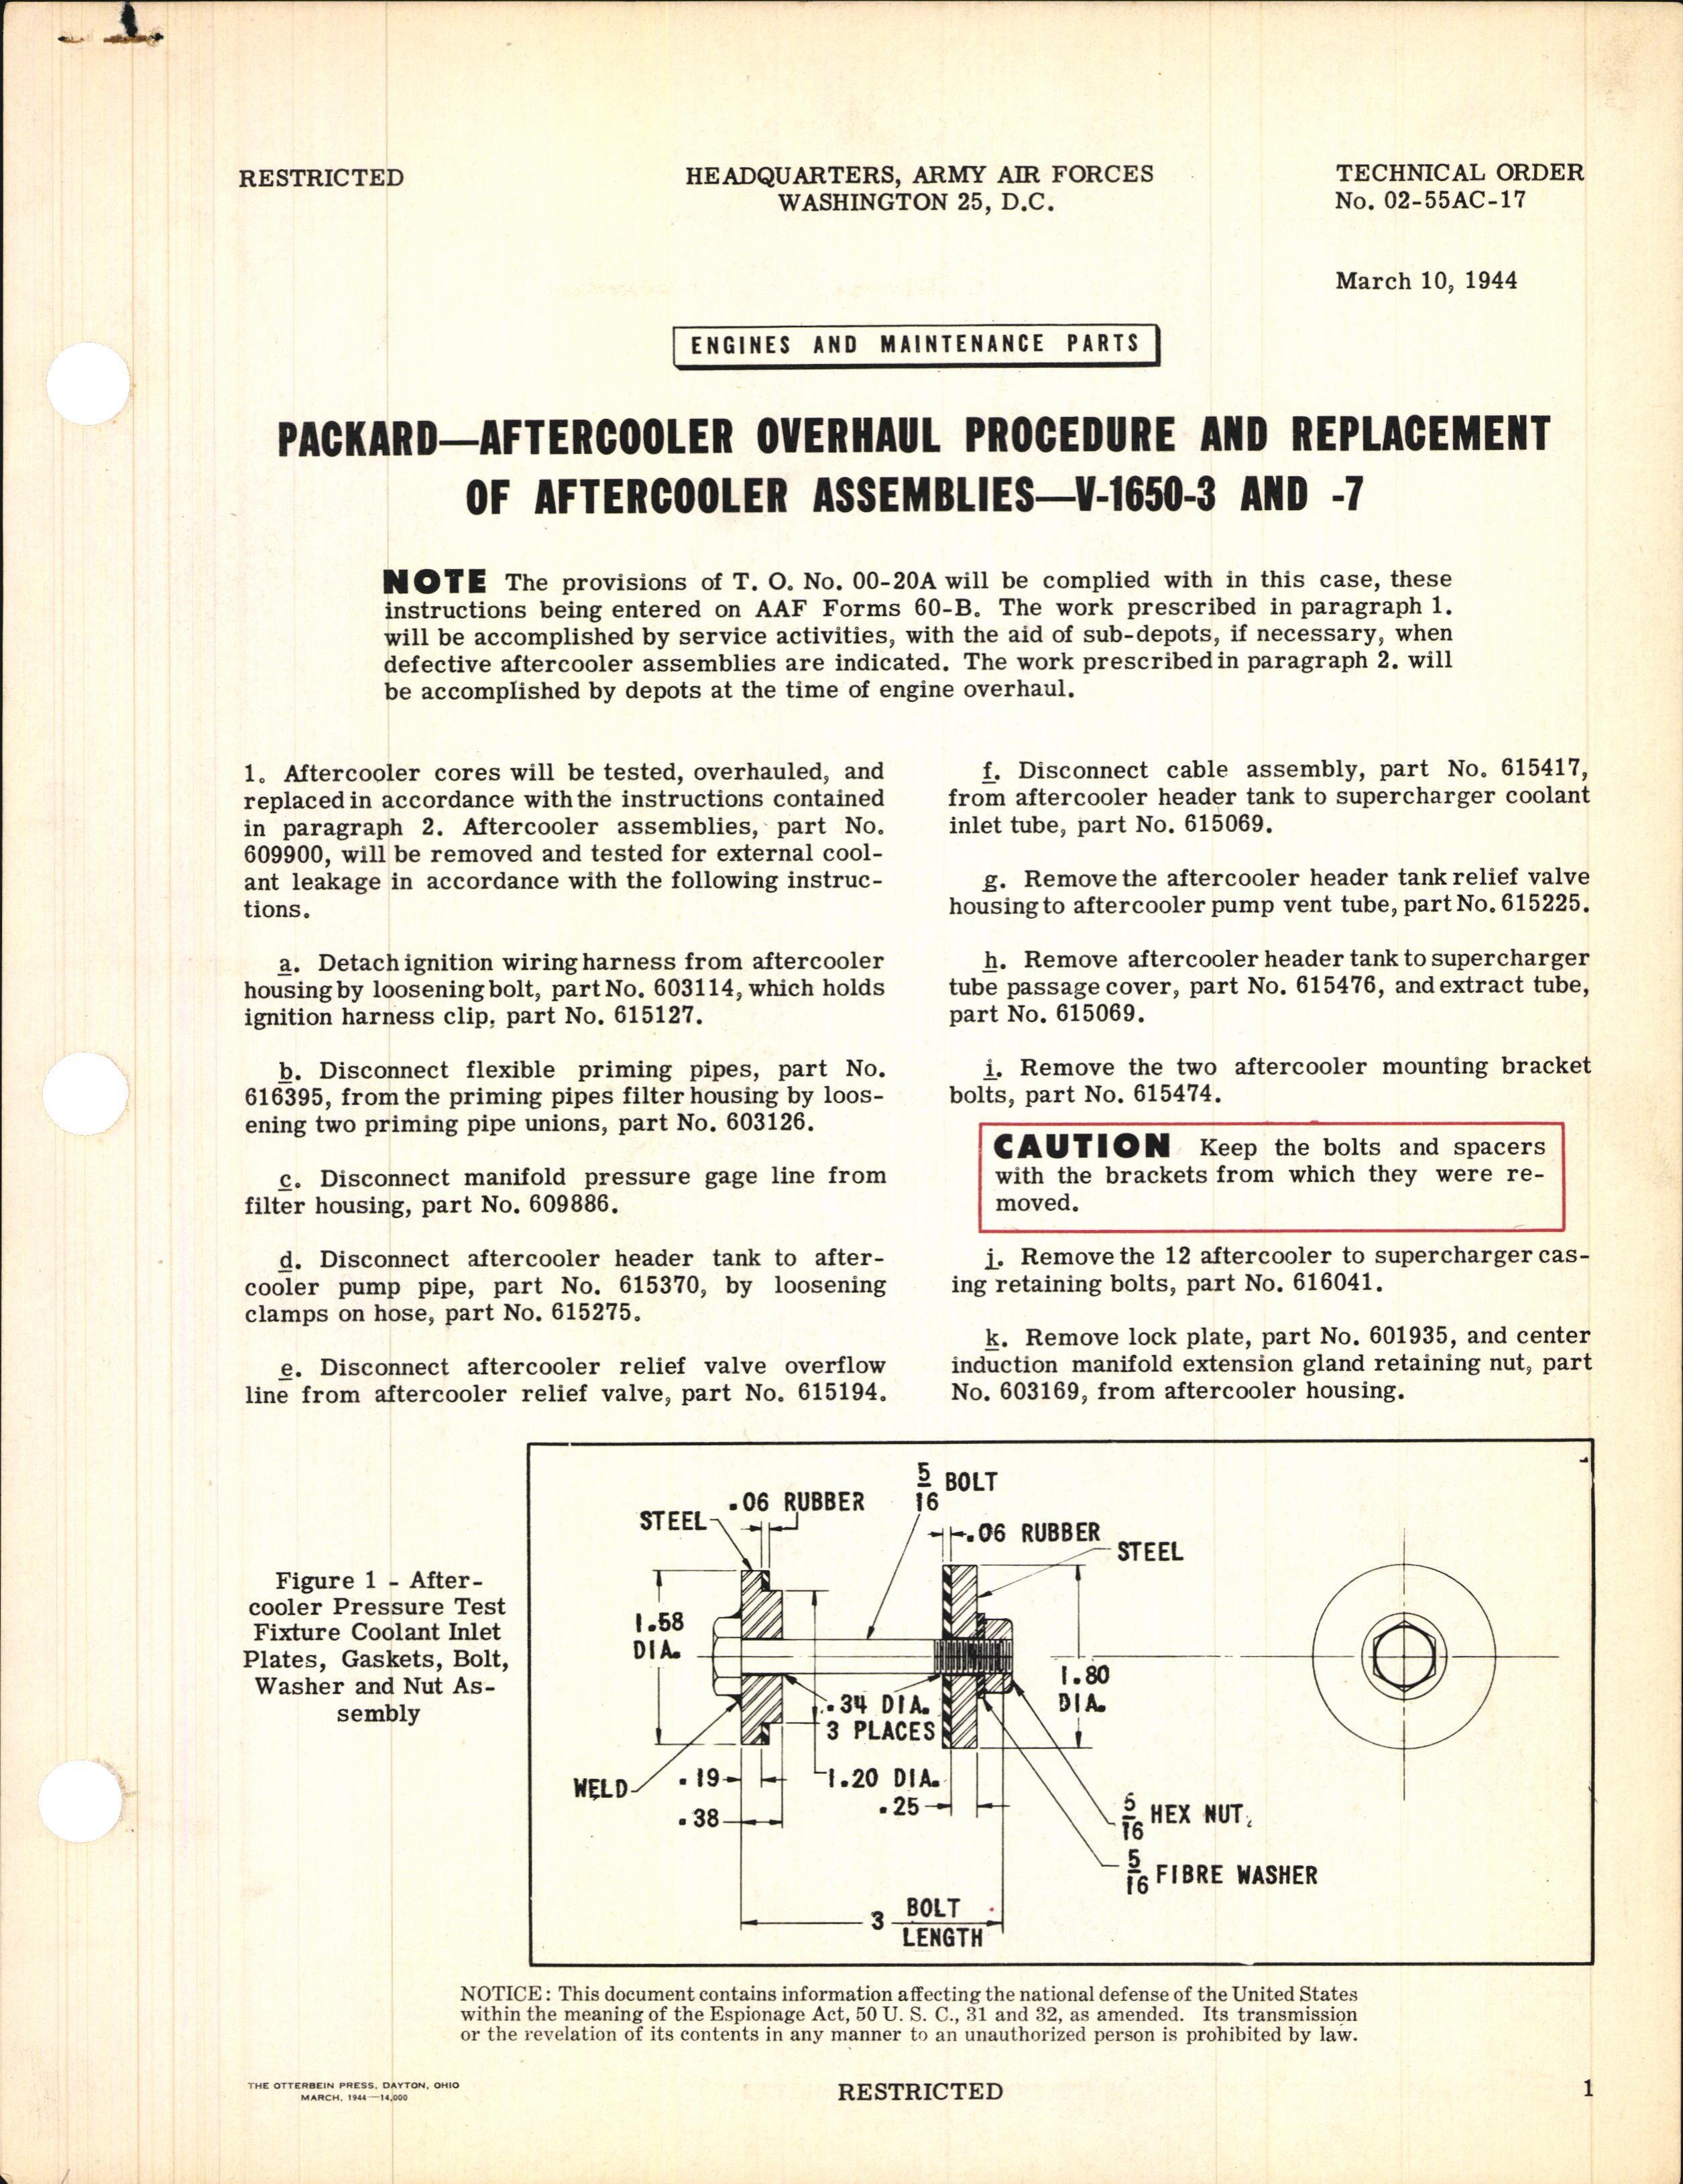 Sample page 1 from AirCorps Library document: Aftercooler Overhaul Procedure and Replacement of Aftercooler Assemblies for V-1650-3 and -7